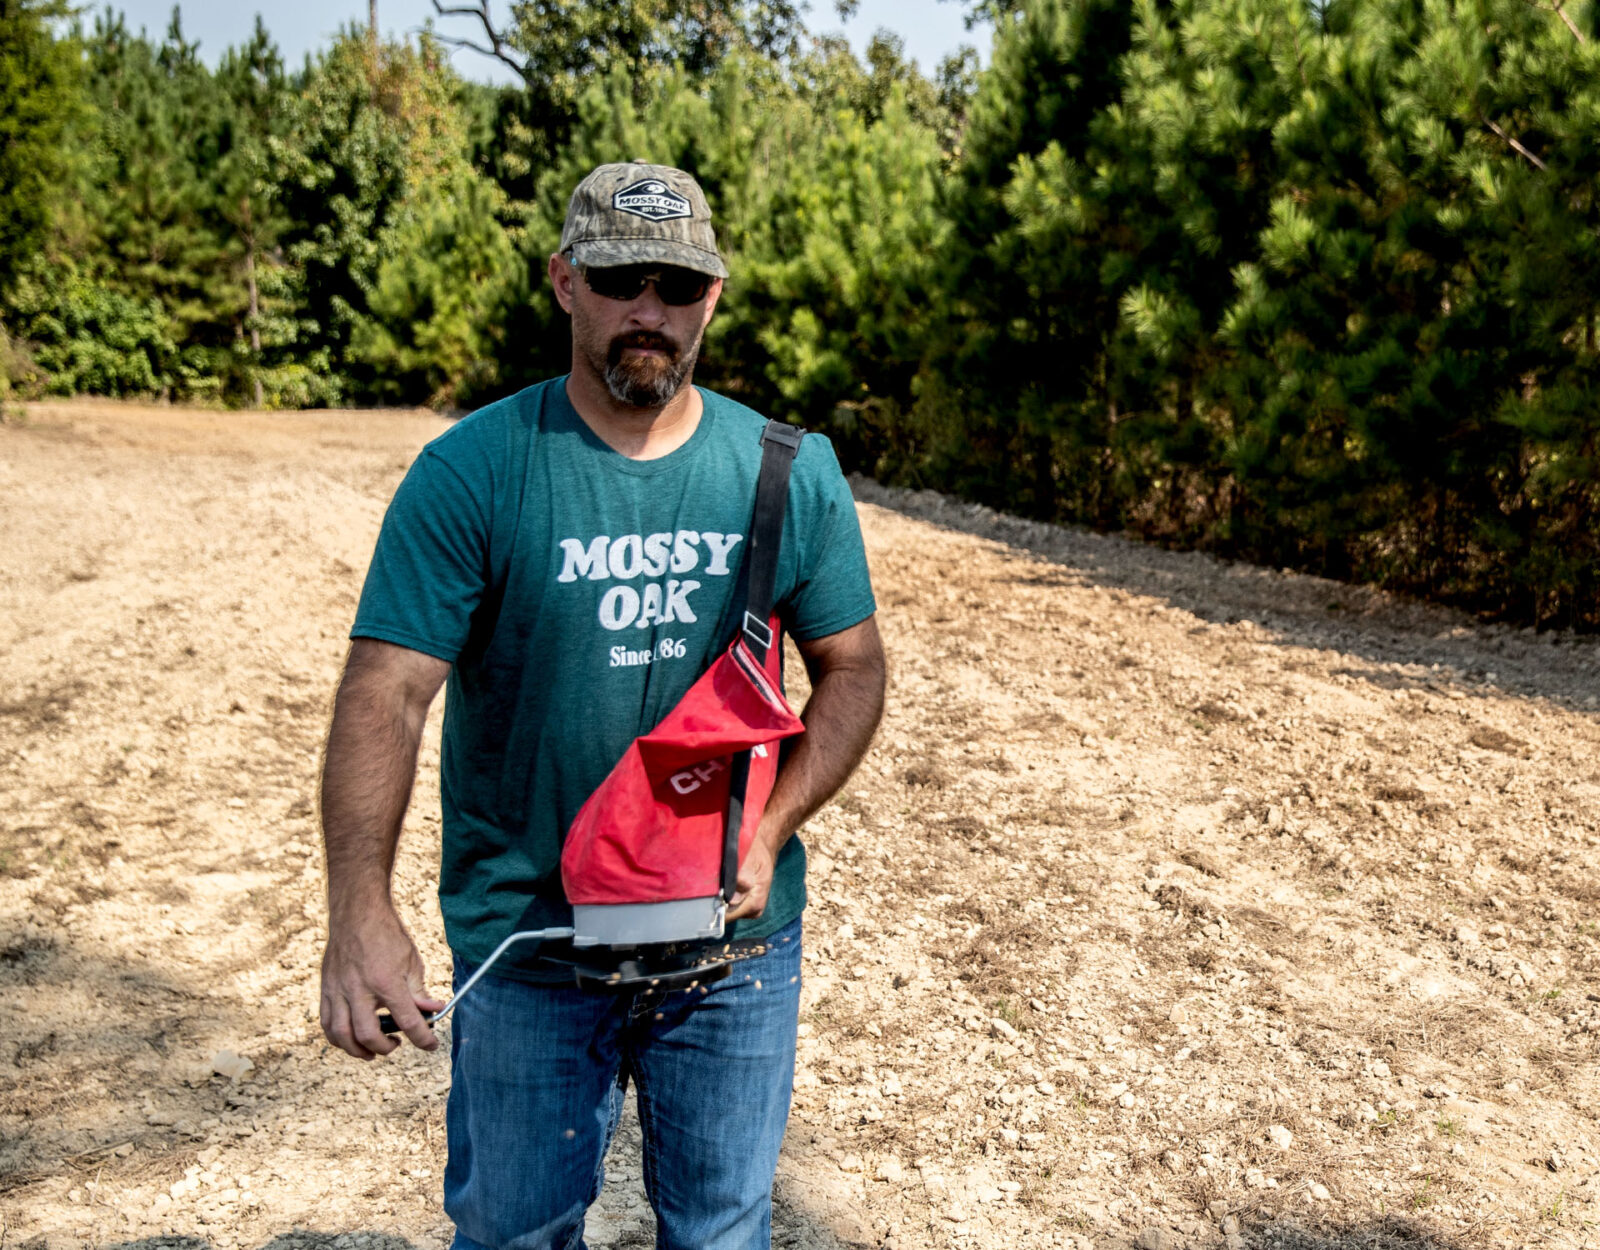 A man in a Mossy Oak tshirt uses a handheld seed spreader. 